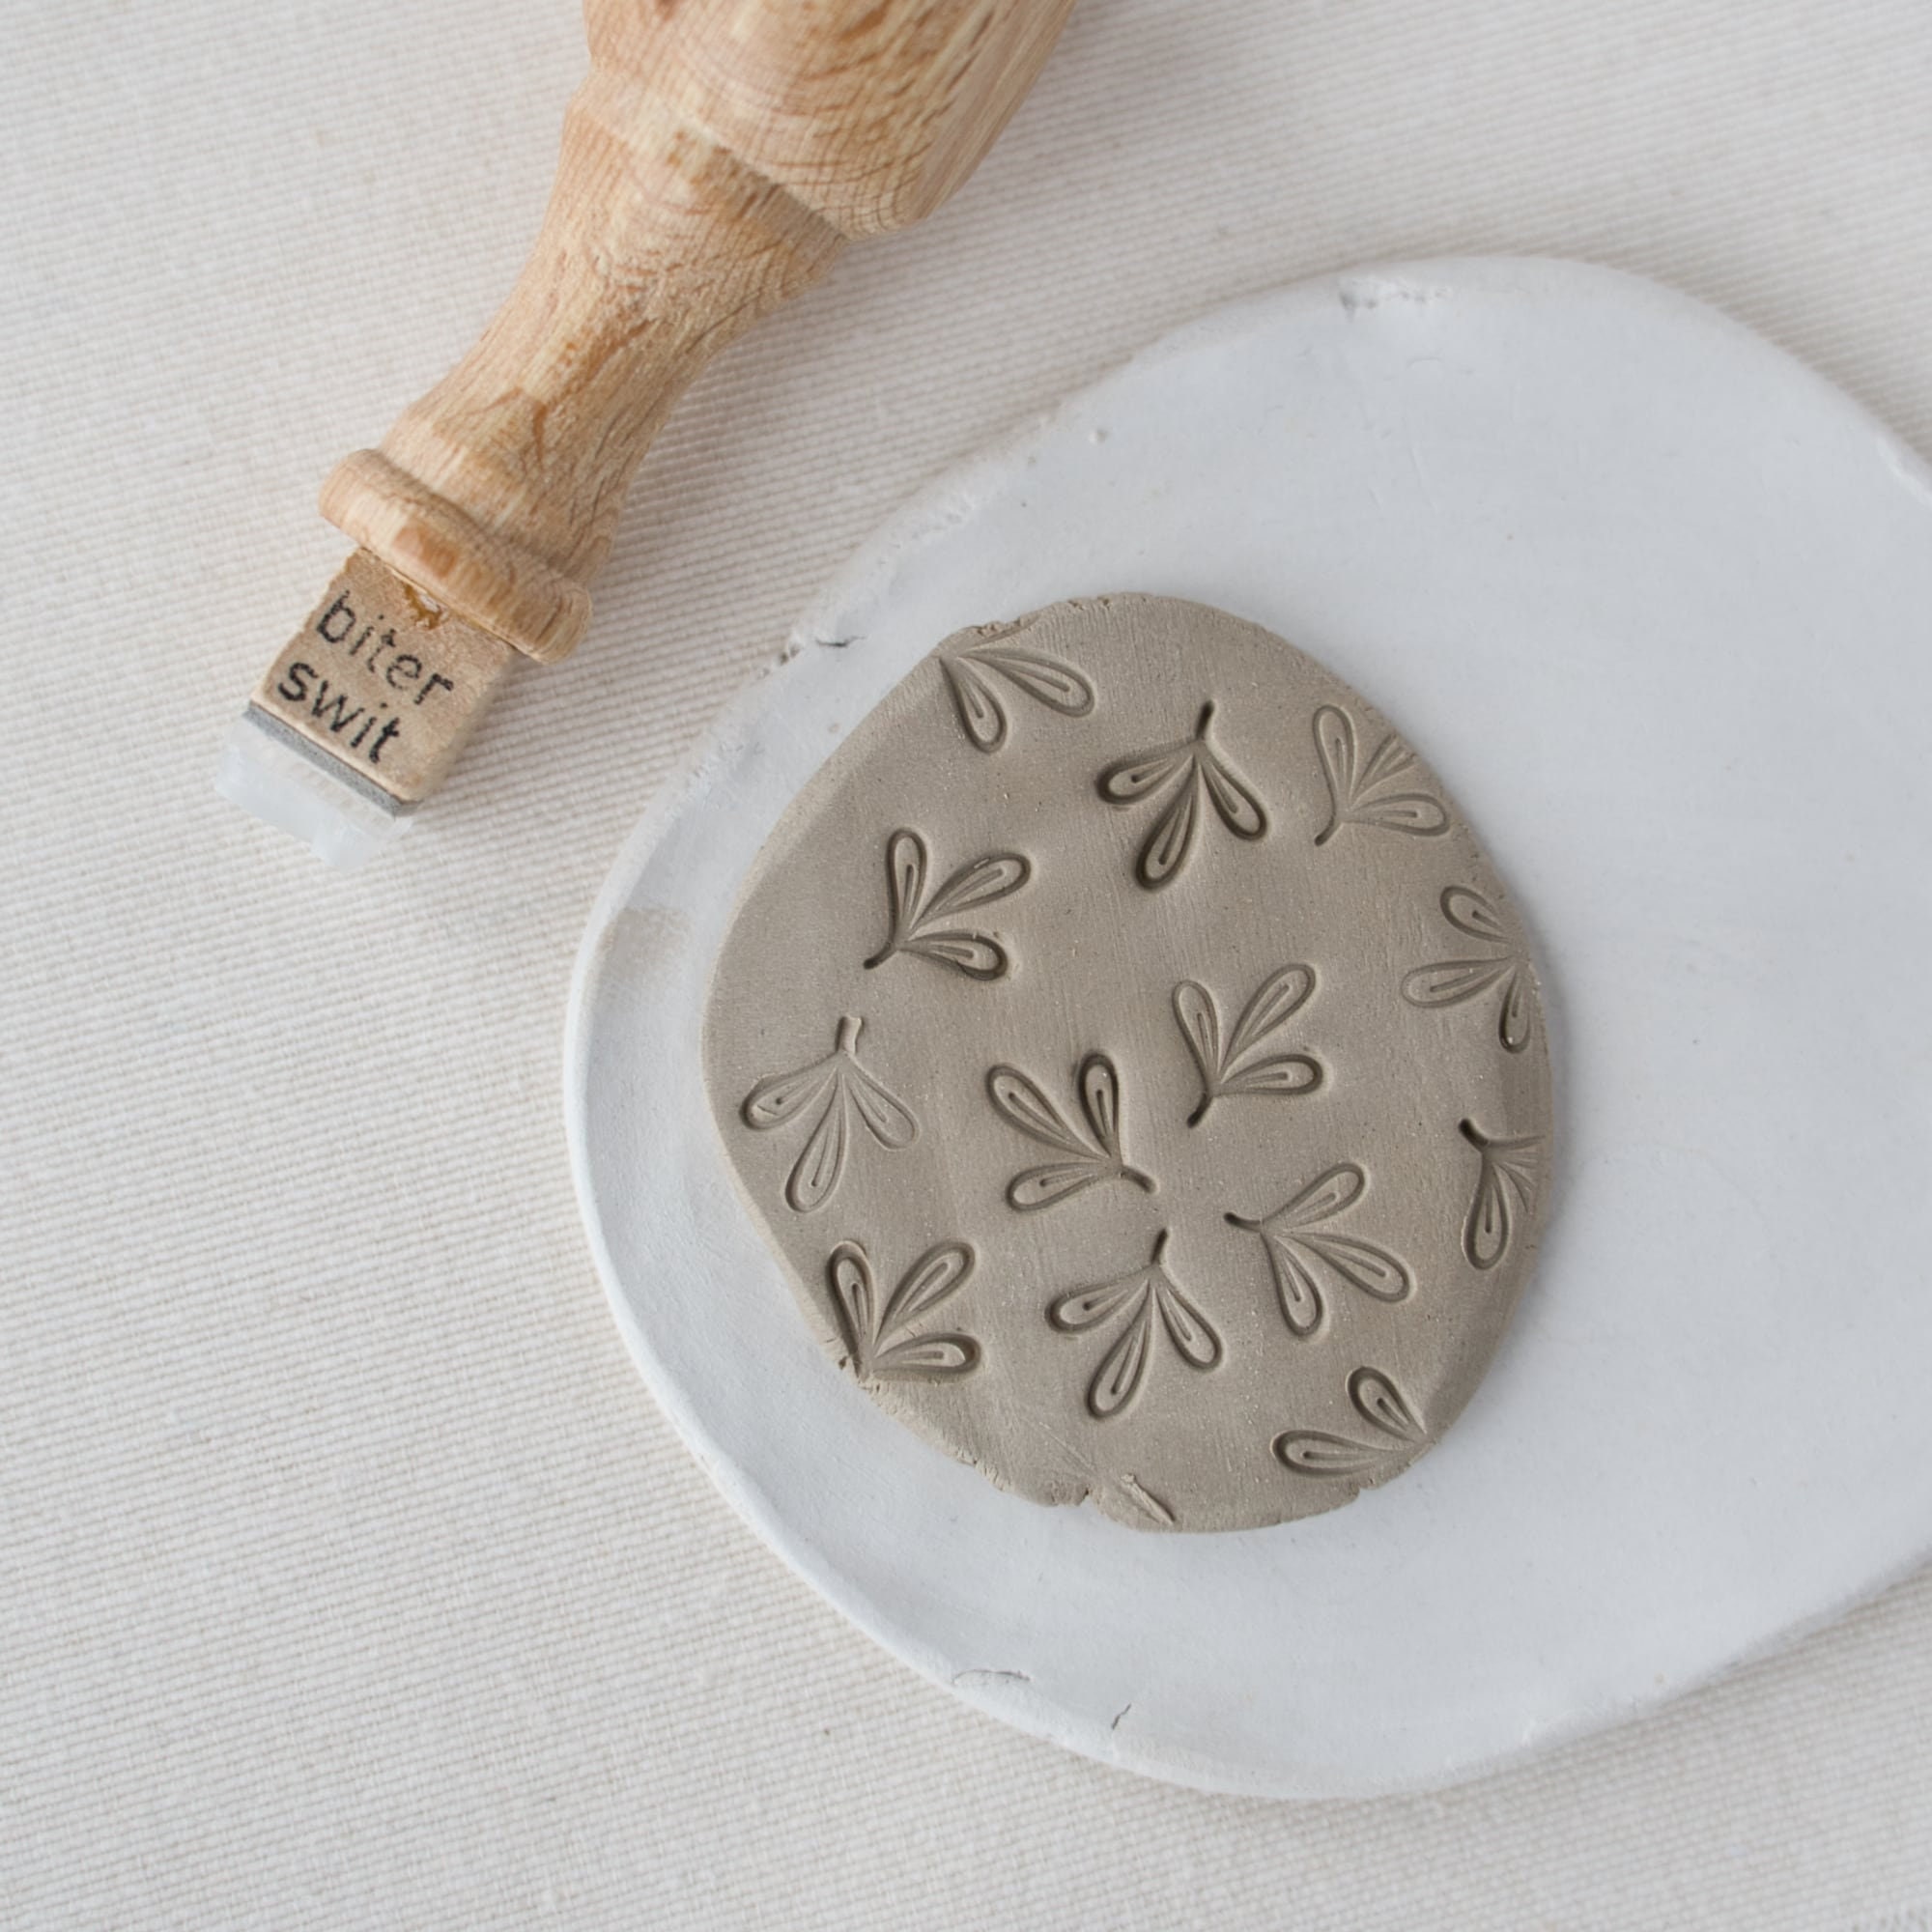 Simple Leaf Texture Clay Stamp for Botanical Patterns on Pottery, Small  Line Leaf Stamp for Natural Soaps, Clay Supplies for Ceramic Classes 